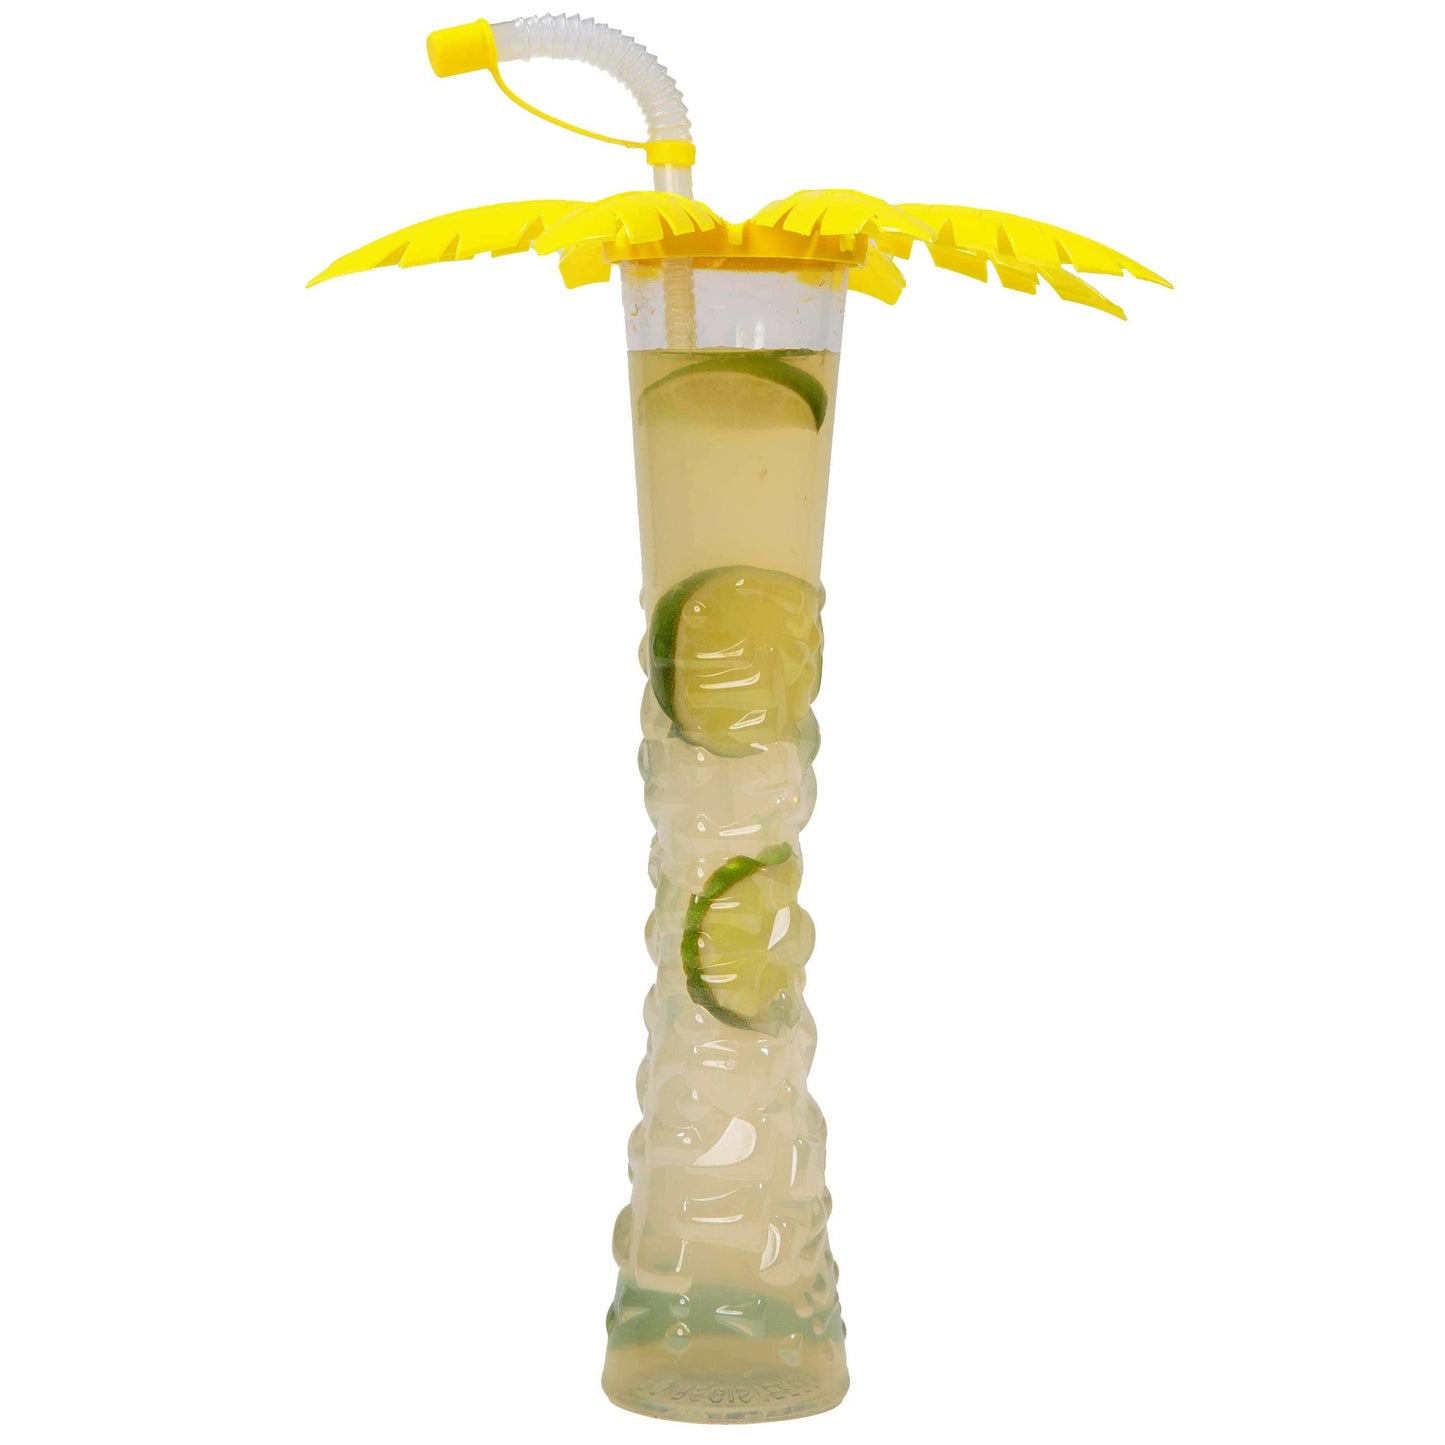 Sweet World USA Yard Cups Palm Tree Yard Cup - 17 oz. (Box of 54 Cups) - clear cup with Yellow Palm Lids and Straws cups with lids and straws